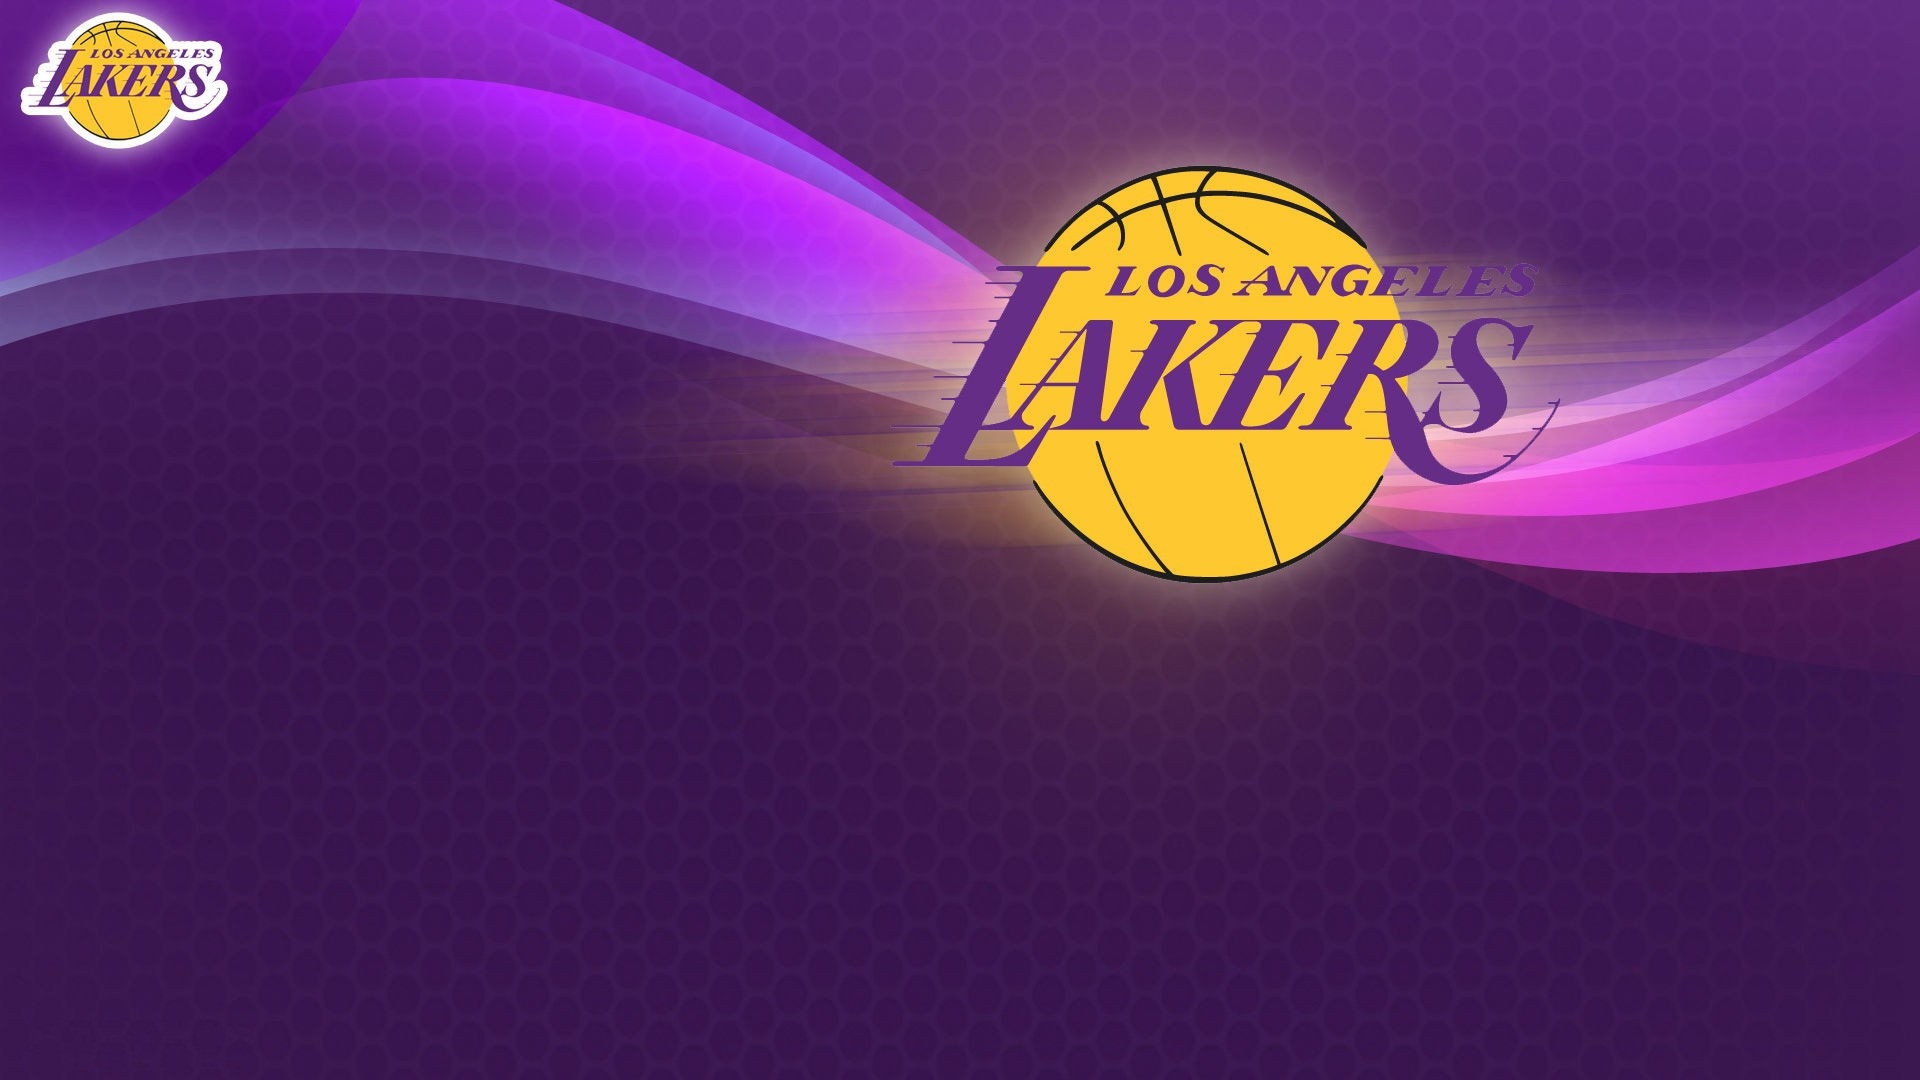 LA Lakers Desktop Wallpapers with image dimensions 1920x1080 pixel. You can make this wallpaper for your Desktop Computer Backgrounds, Windows or Mac Screensavers, iPhone Lock screen, Tablet or Android and another Mobile Phone device